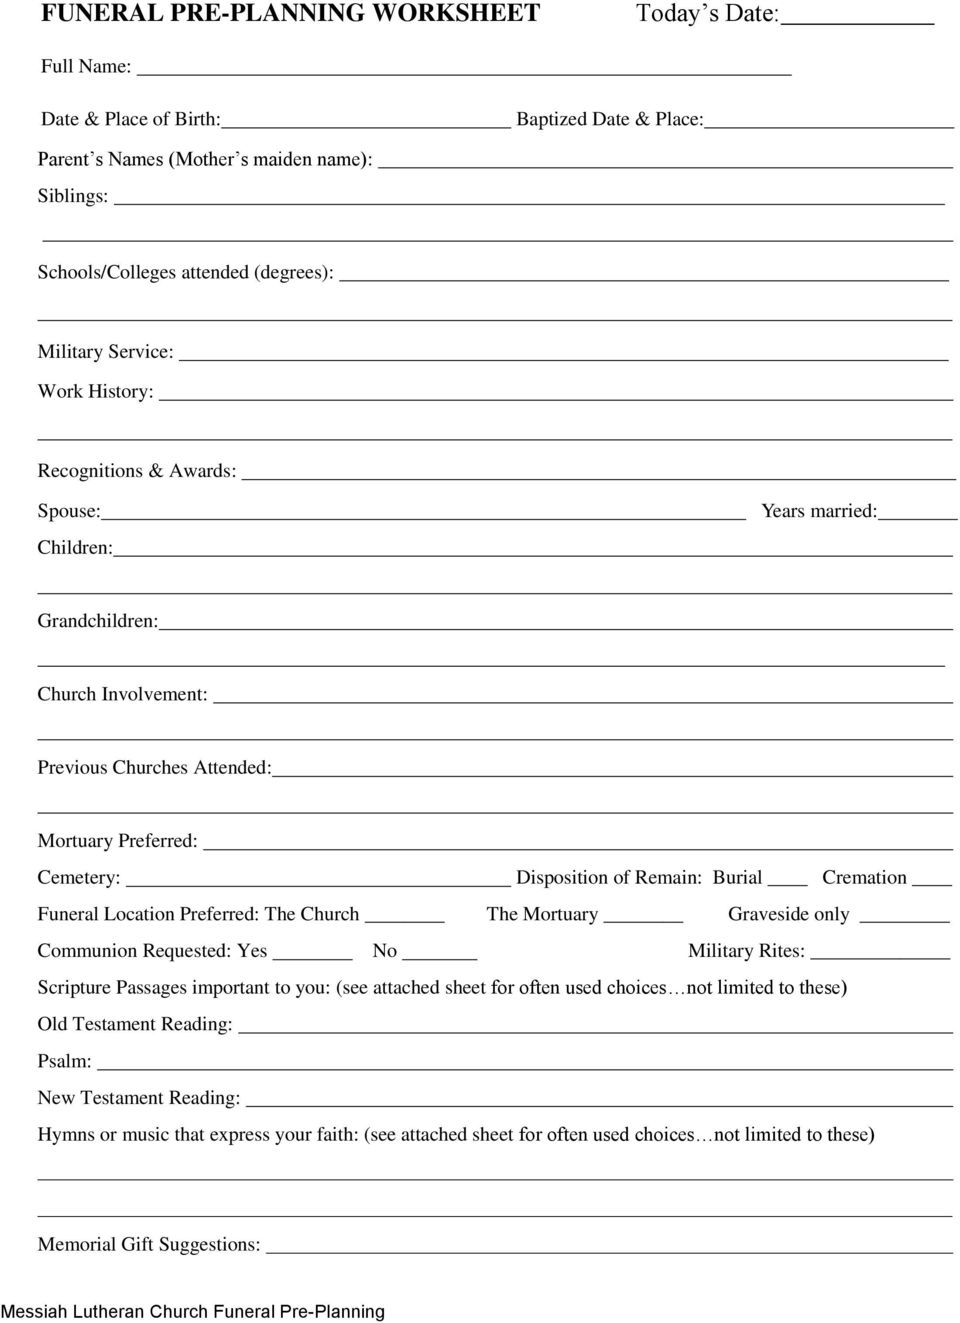 Funeral Budget Spreadsheet Pertaining To Funeral Pre Planning Worksheet Excel Template